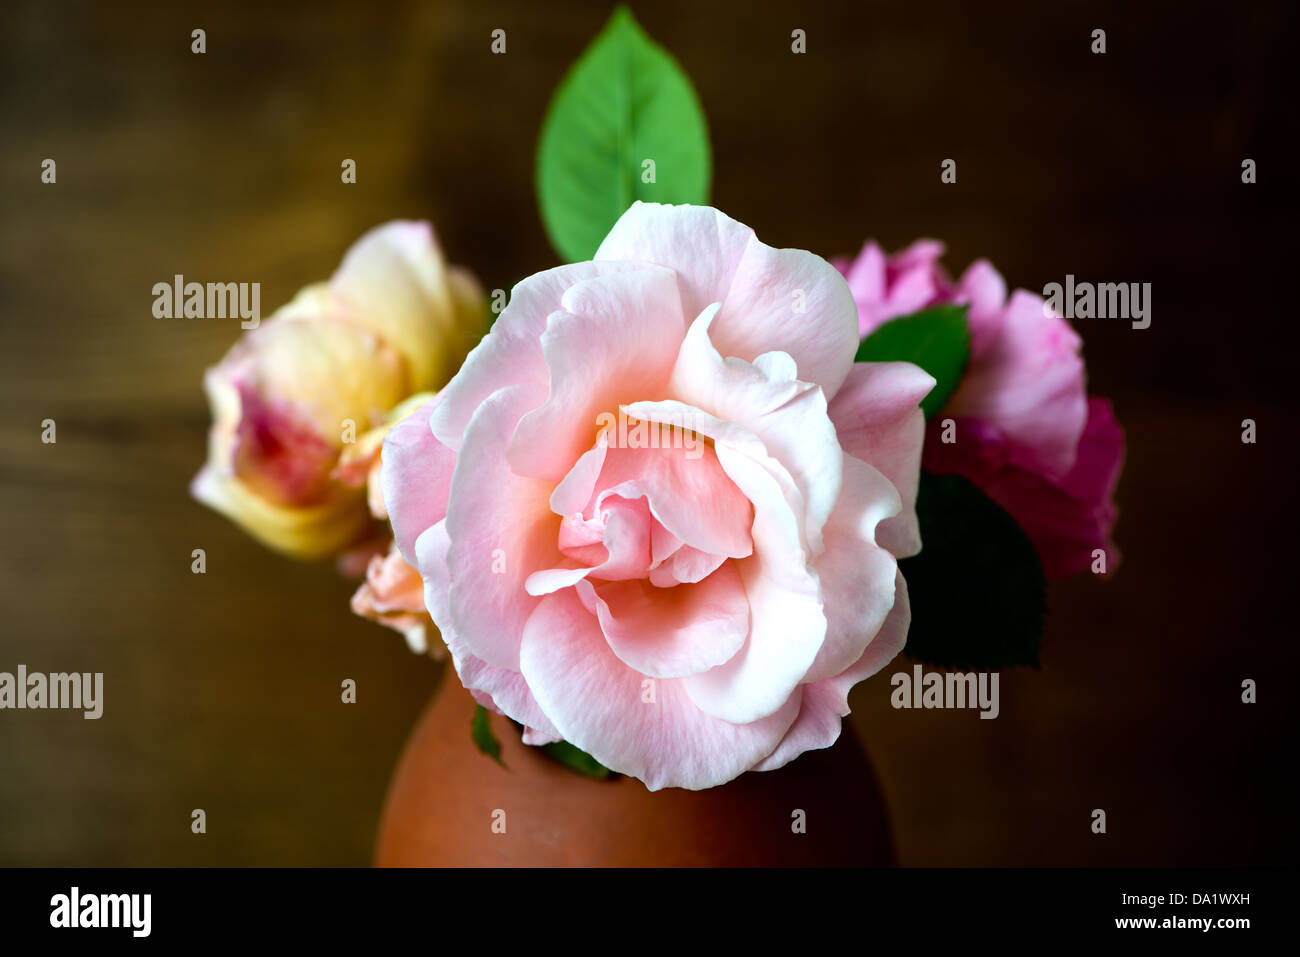 An arrangement of roses in an earthenware vase. Stock Photo